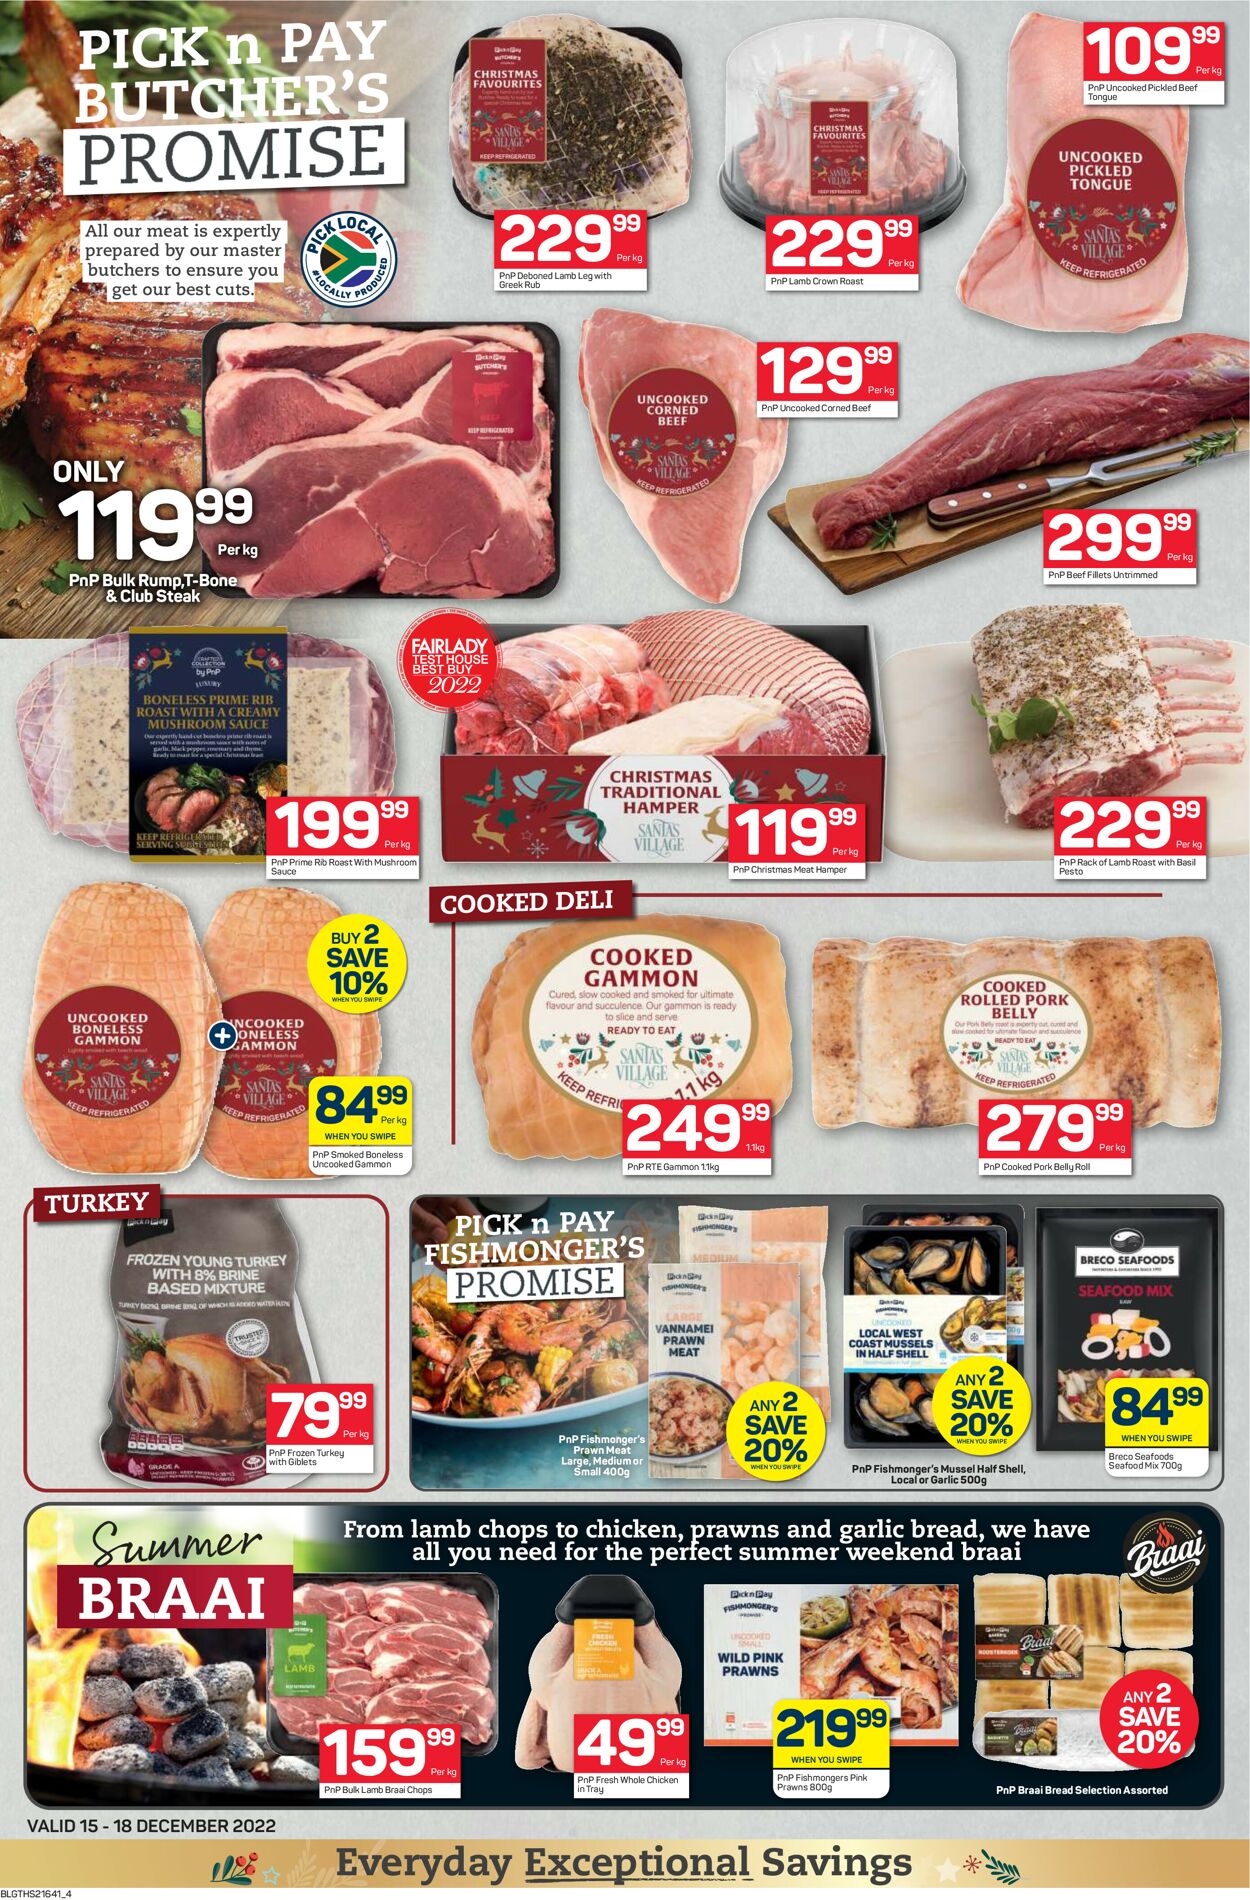 Pick n Pay Catalogue - 2022/12/15-2022/12/18 (Page 4)